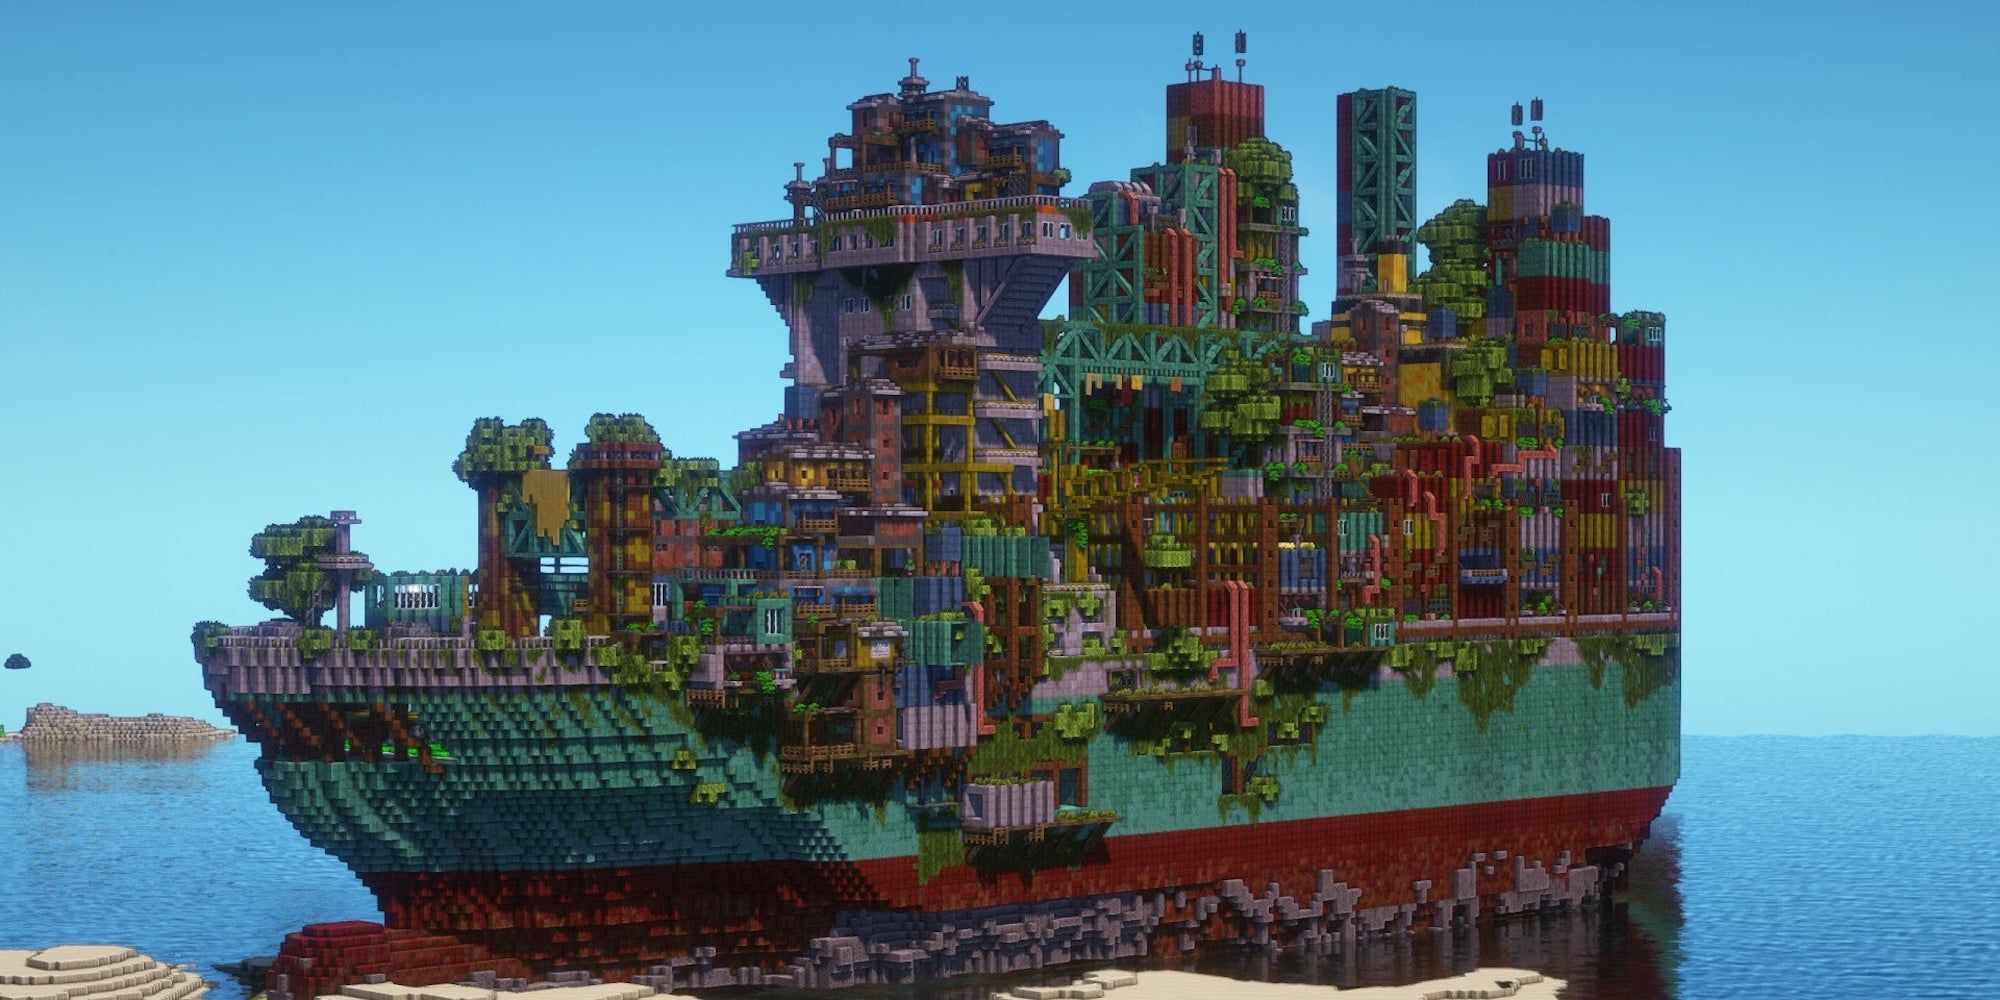 Impressive Minecraft Build Turns a Container Ship Into a Settlement